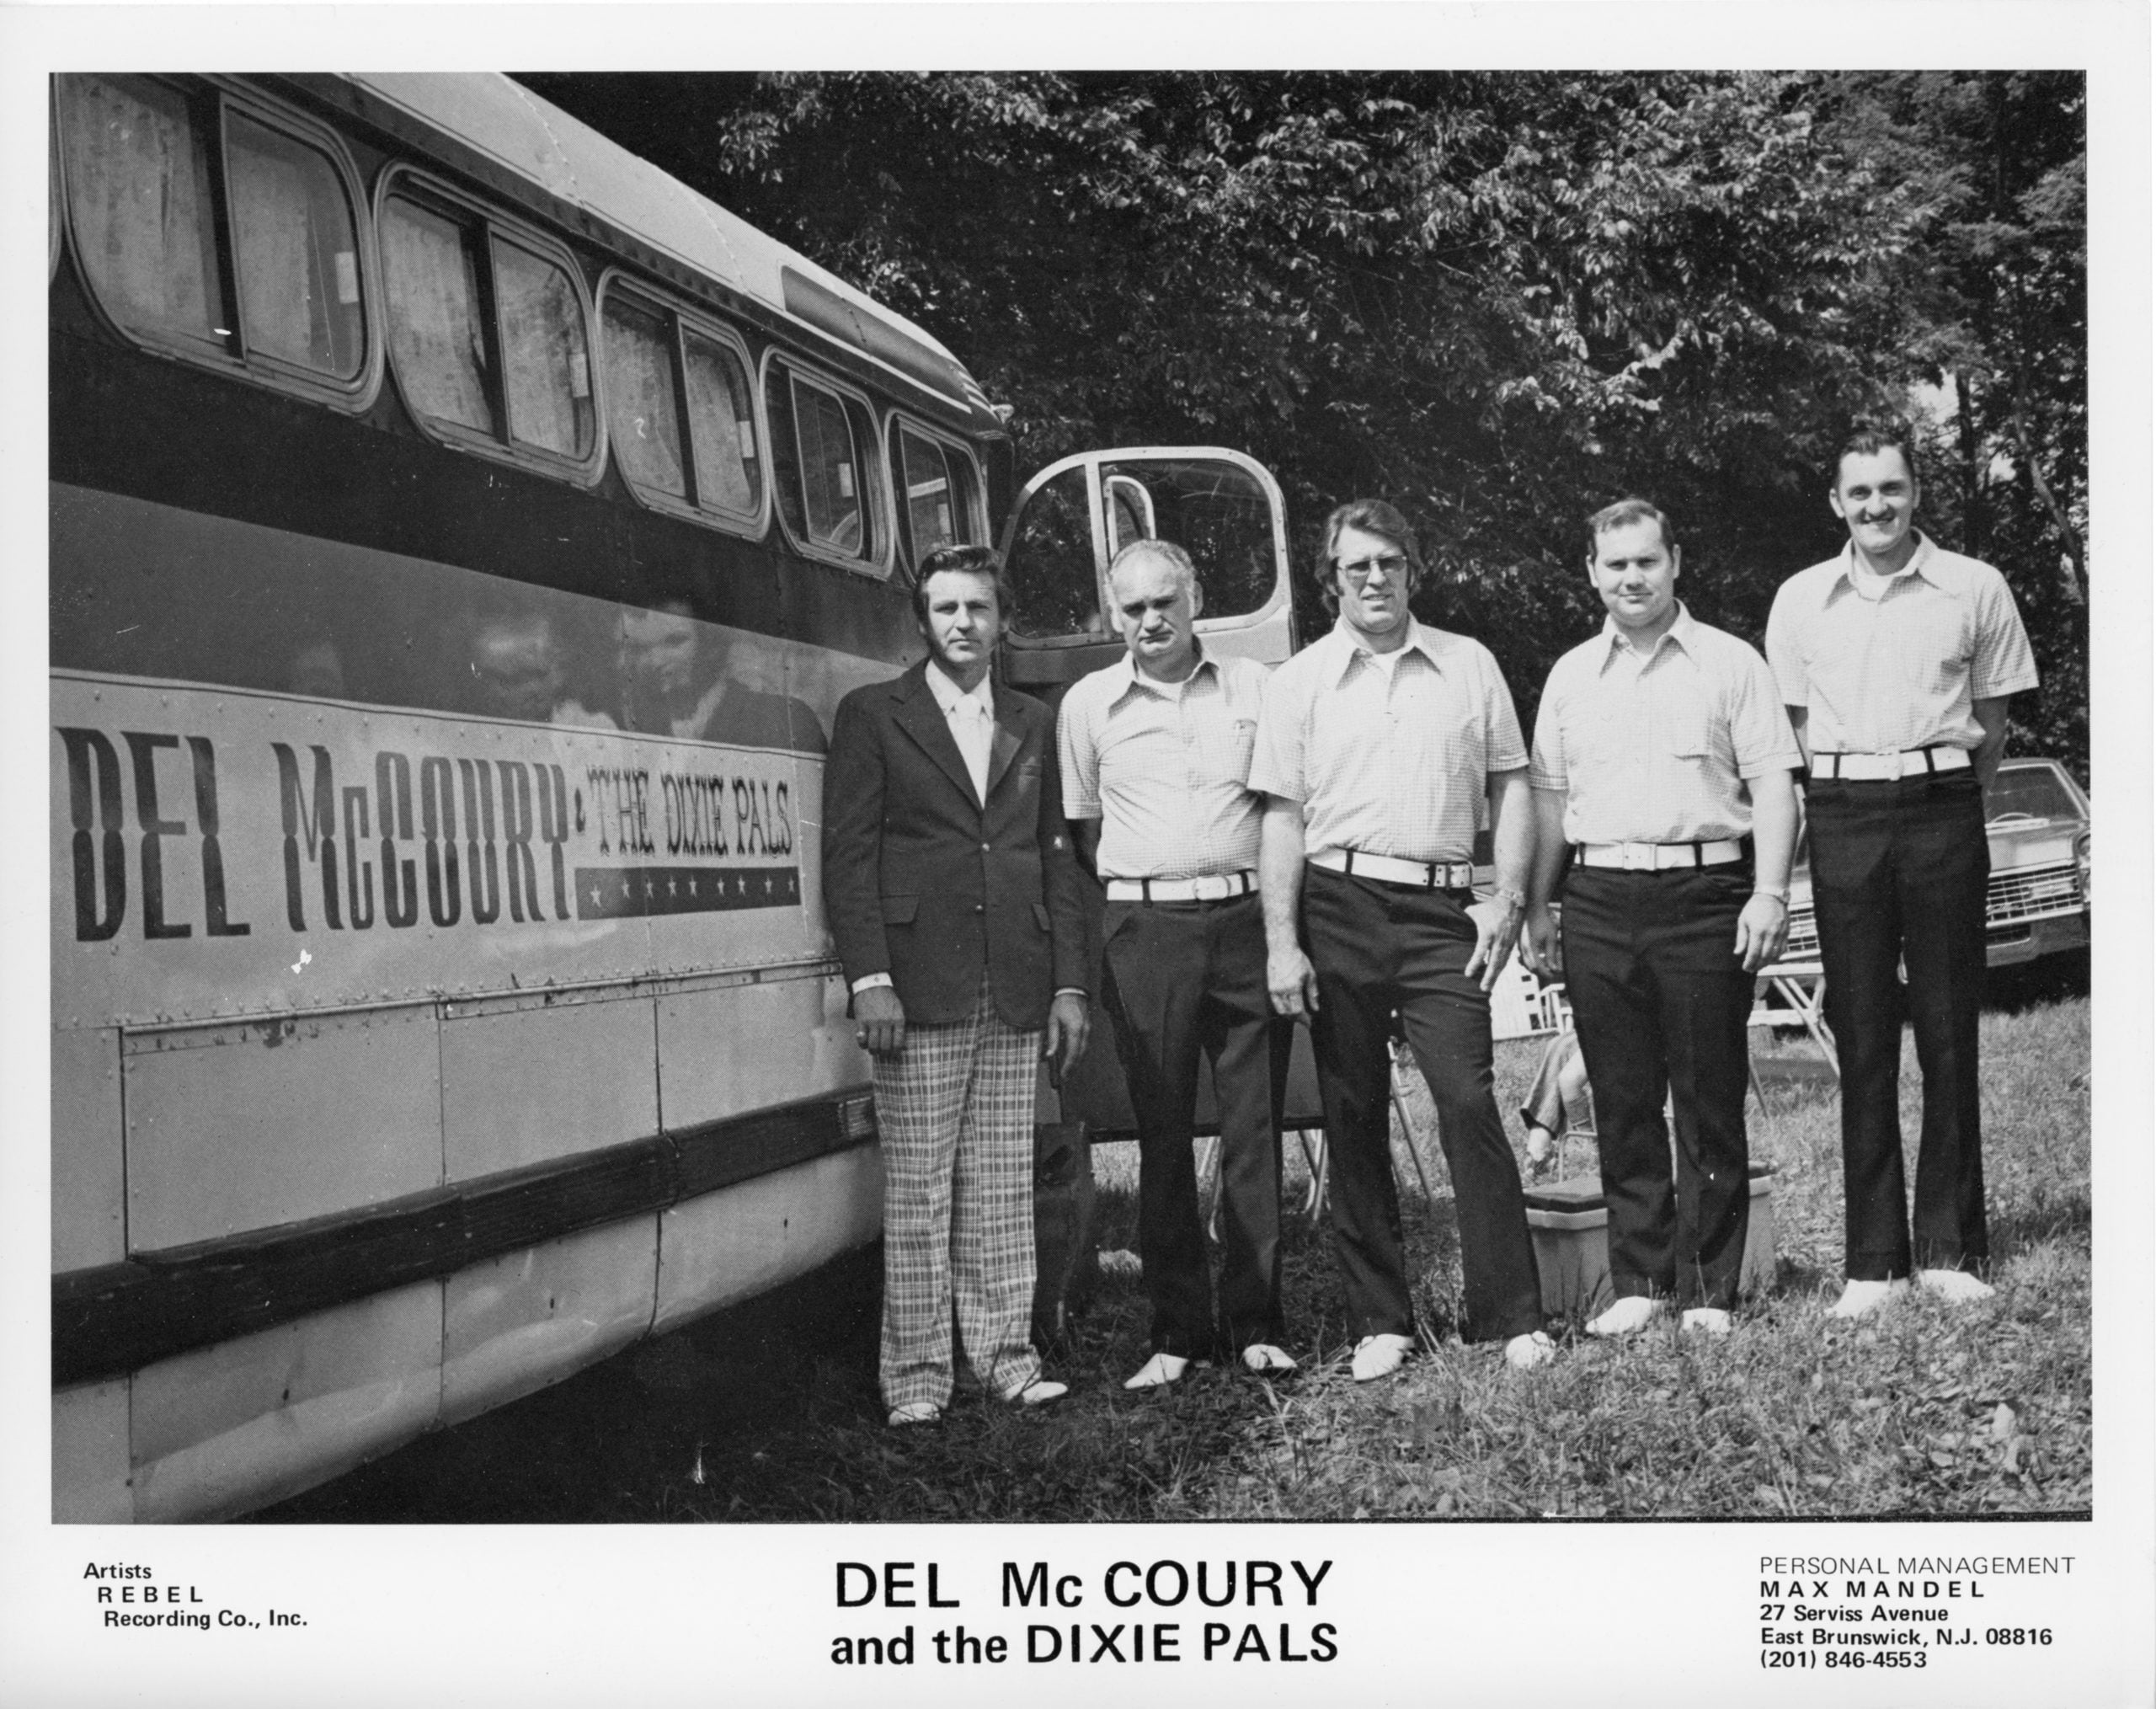 Del McCoury and the Dixie Pals